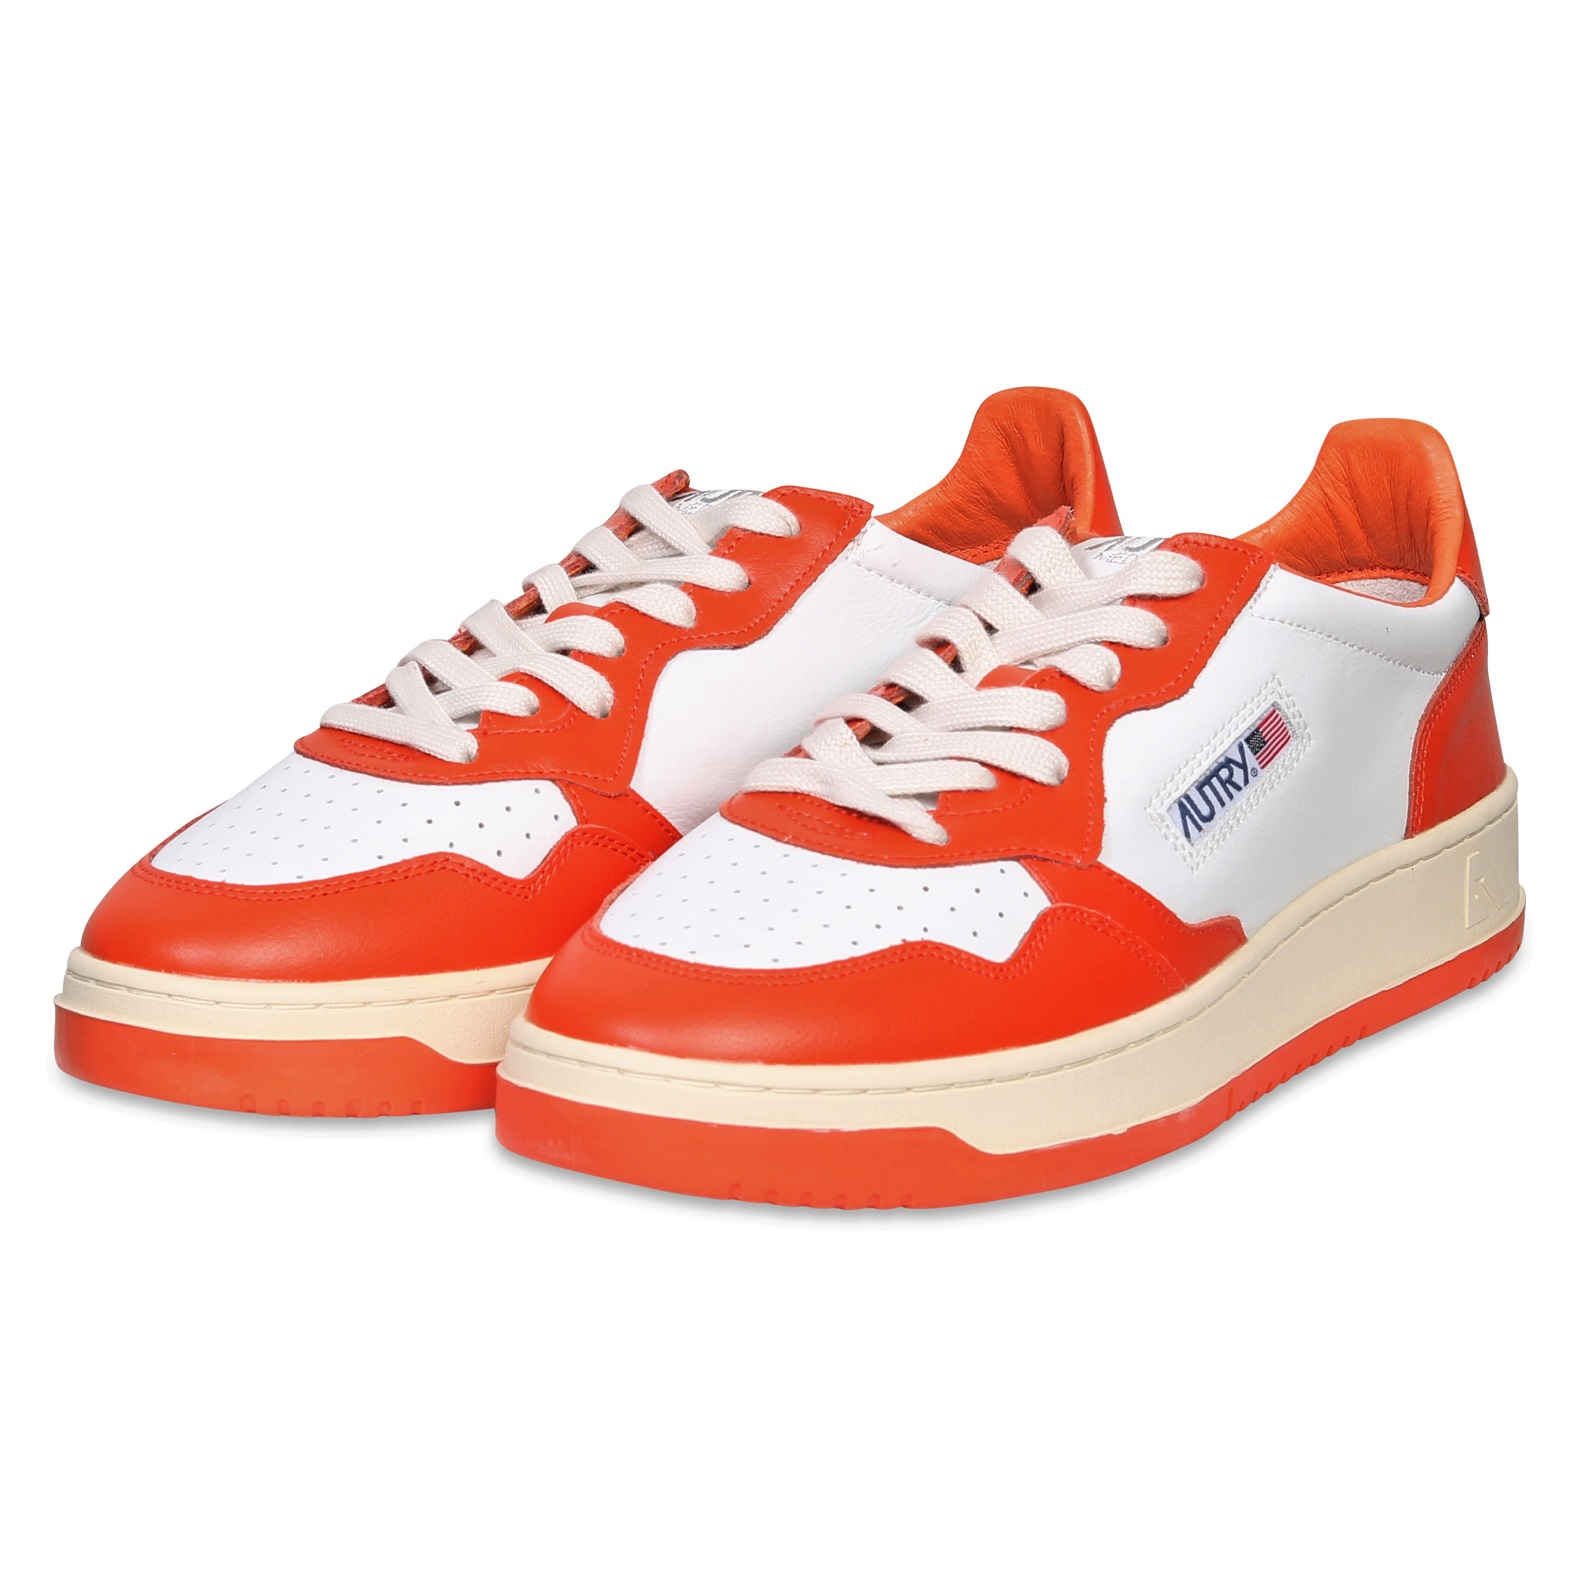 Autry Action Shoes Low Sneaker White/Tangerine 40